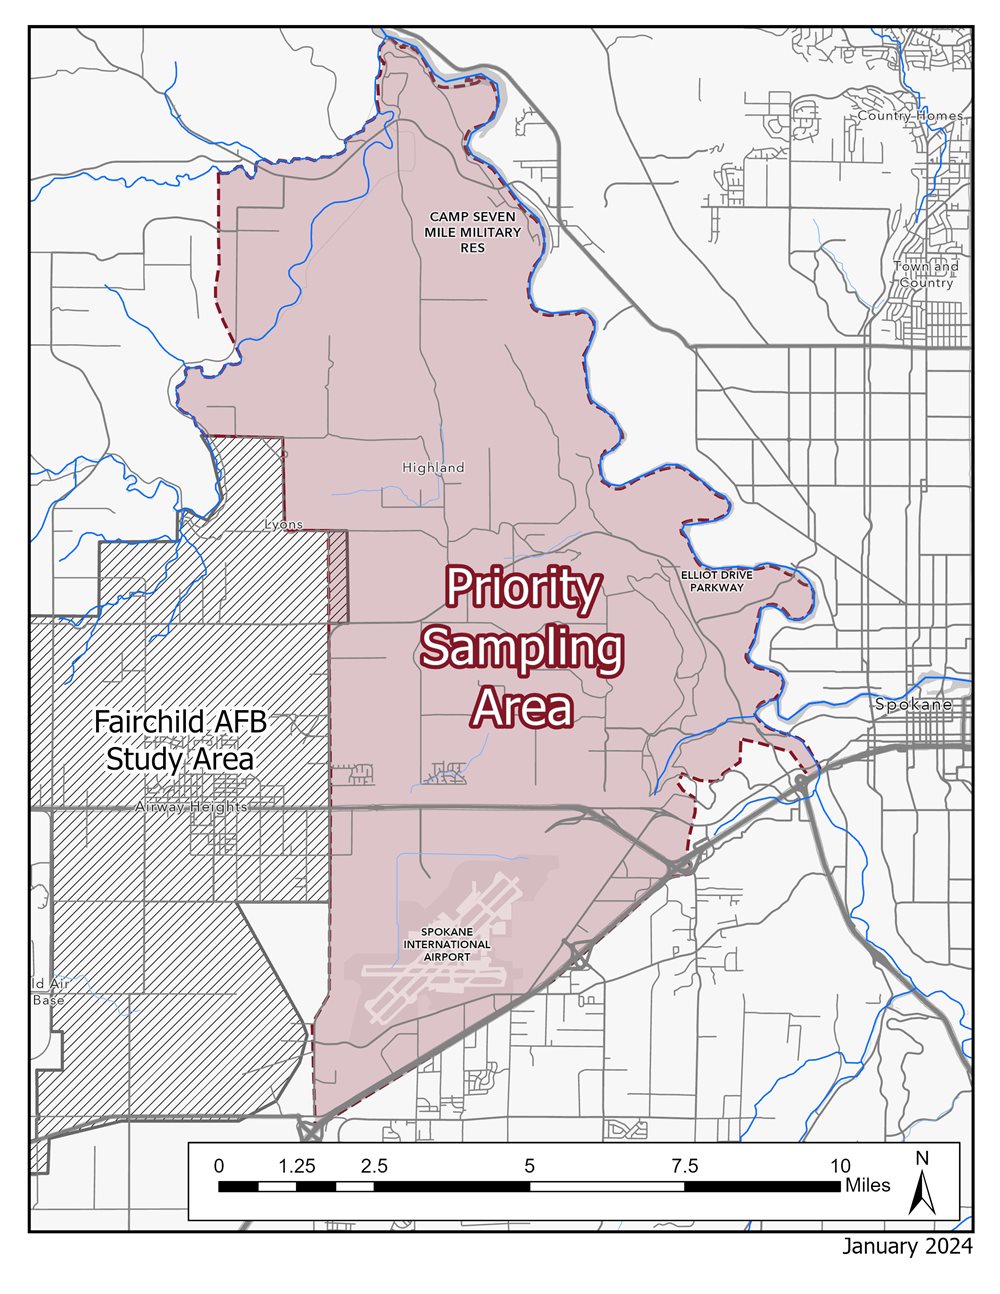 The sampling area is between Hayford road and the Spokane river, down to I-90 and up to Deep Creek.